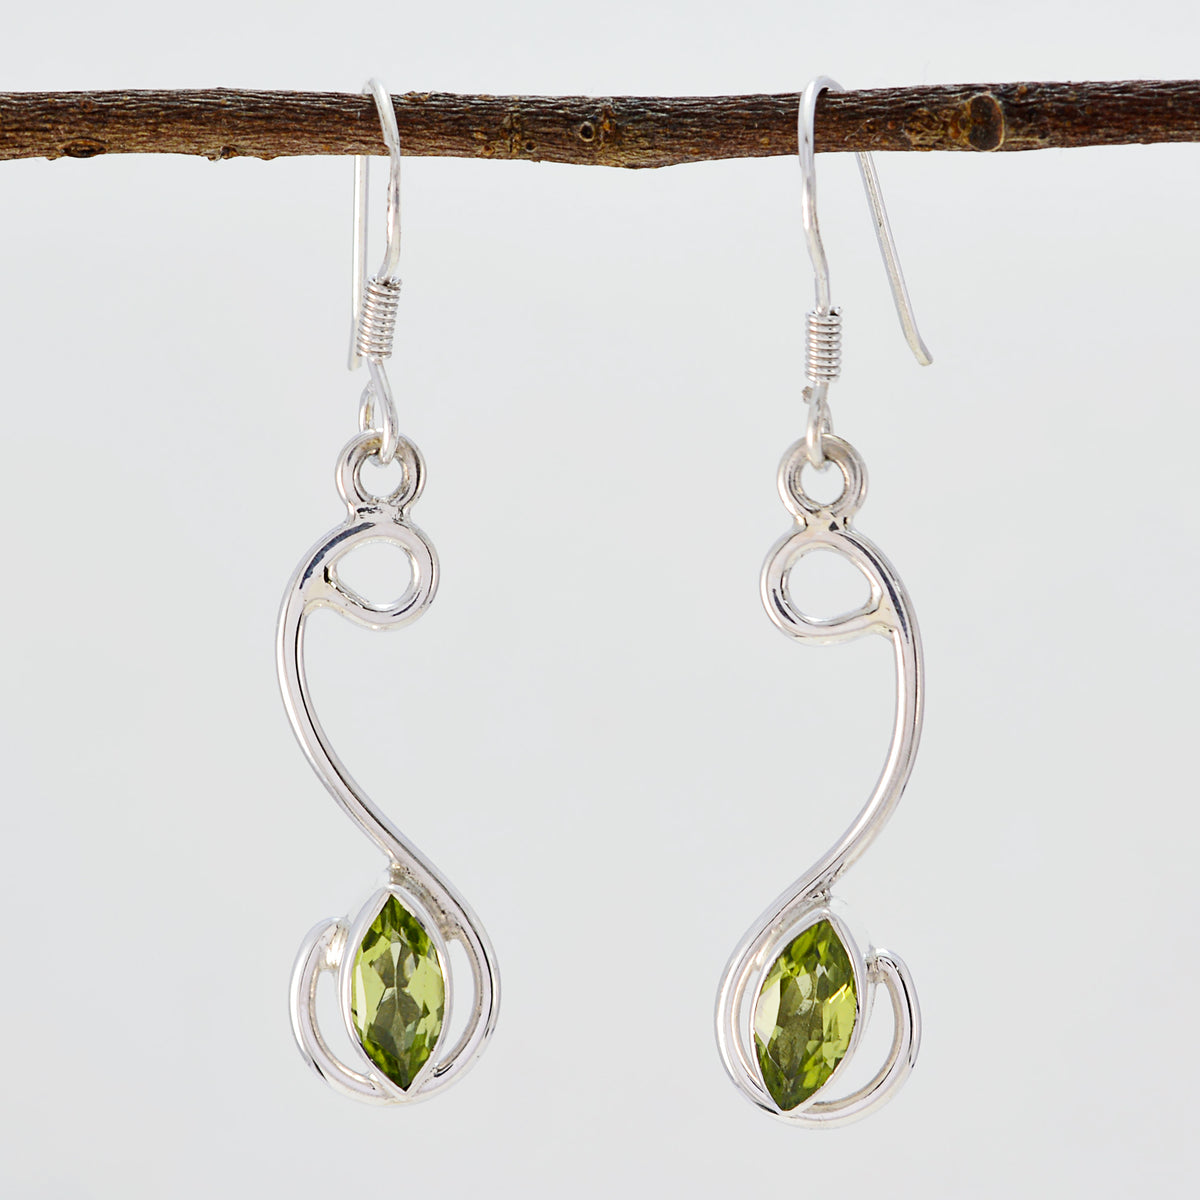 Riyo Genuine Gems marquise Faceted Green Peridot Silver Earrings gift for children day